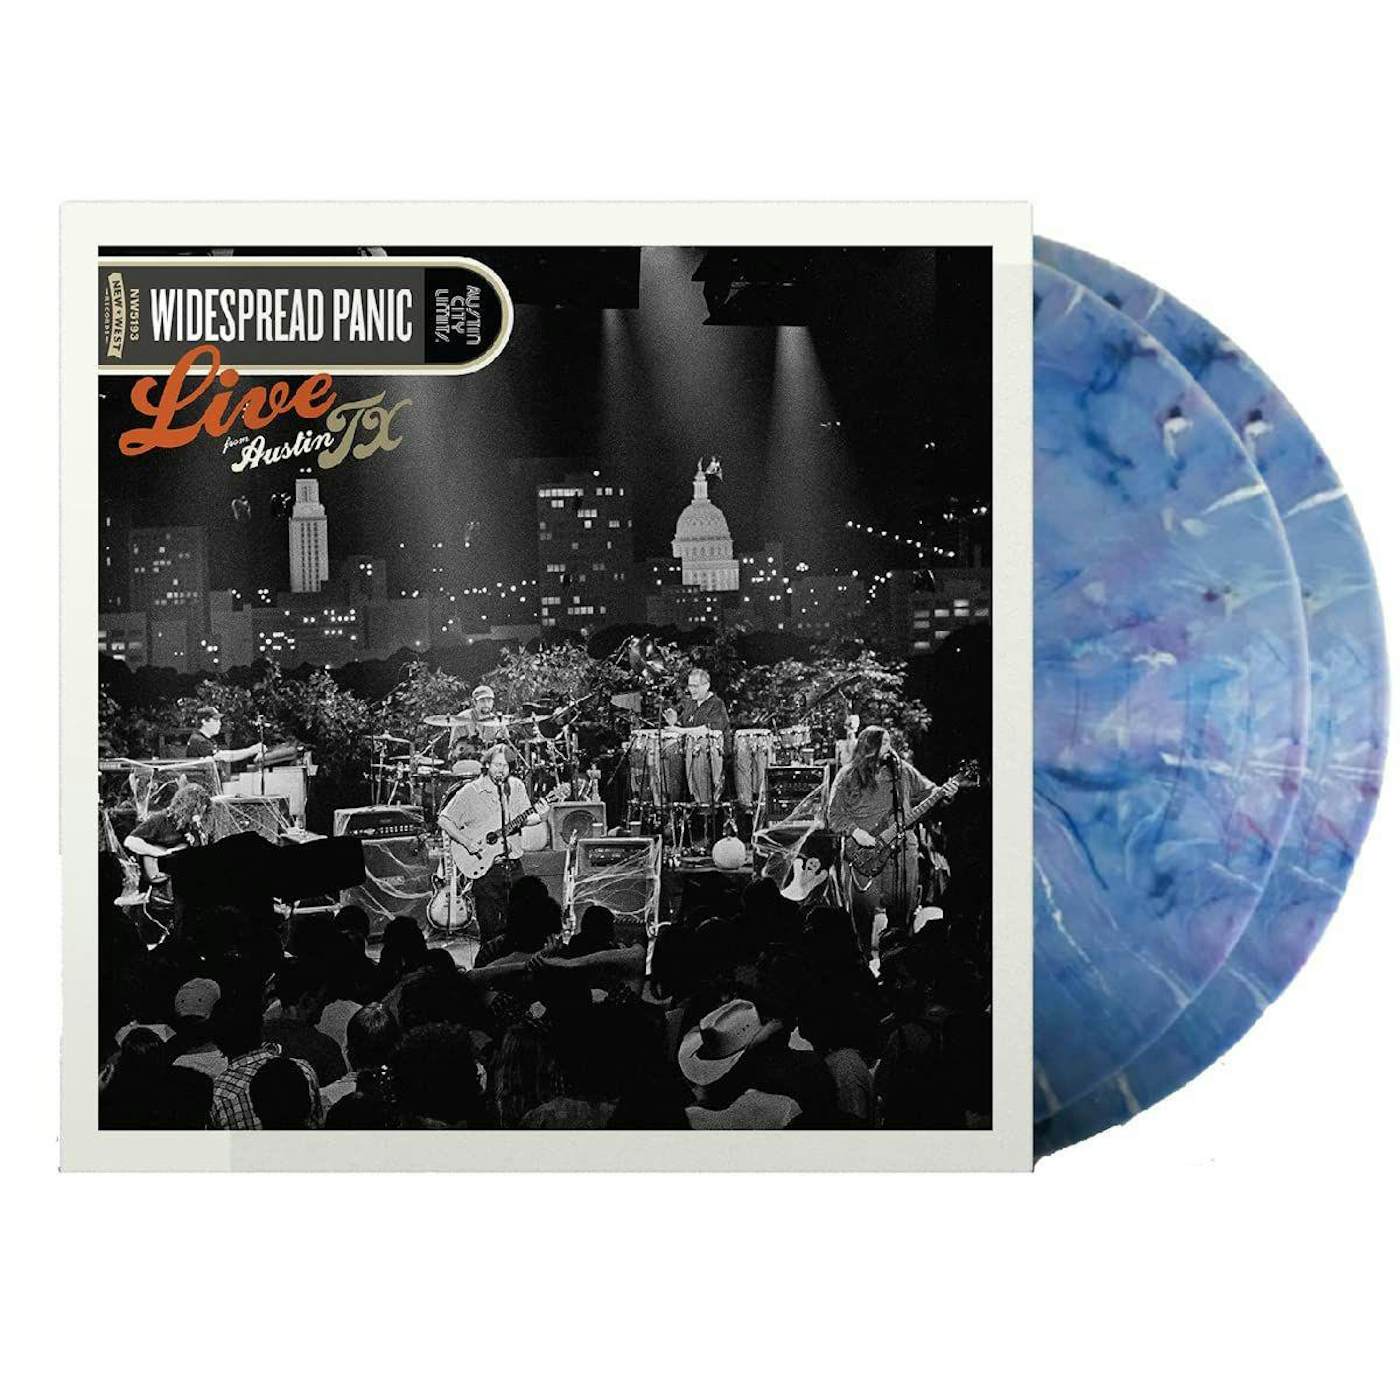 Widespread Panic LIVE FROM AUSTIN, TX (CHILLY WATER BLUE VINYL/2LP) Vinyl Record